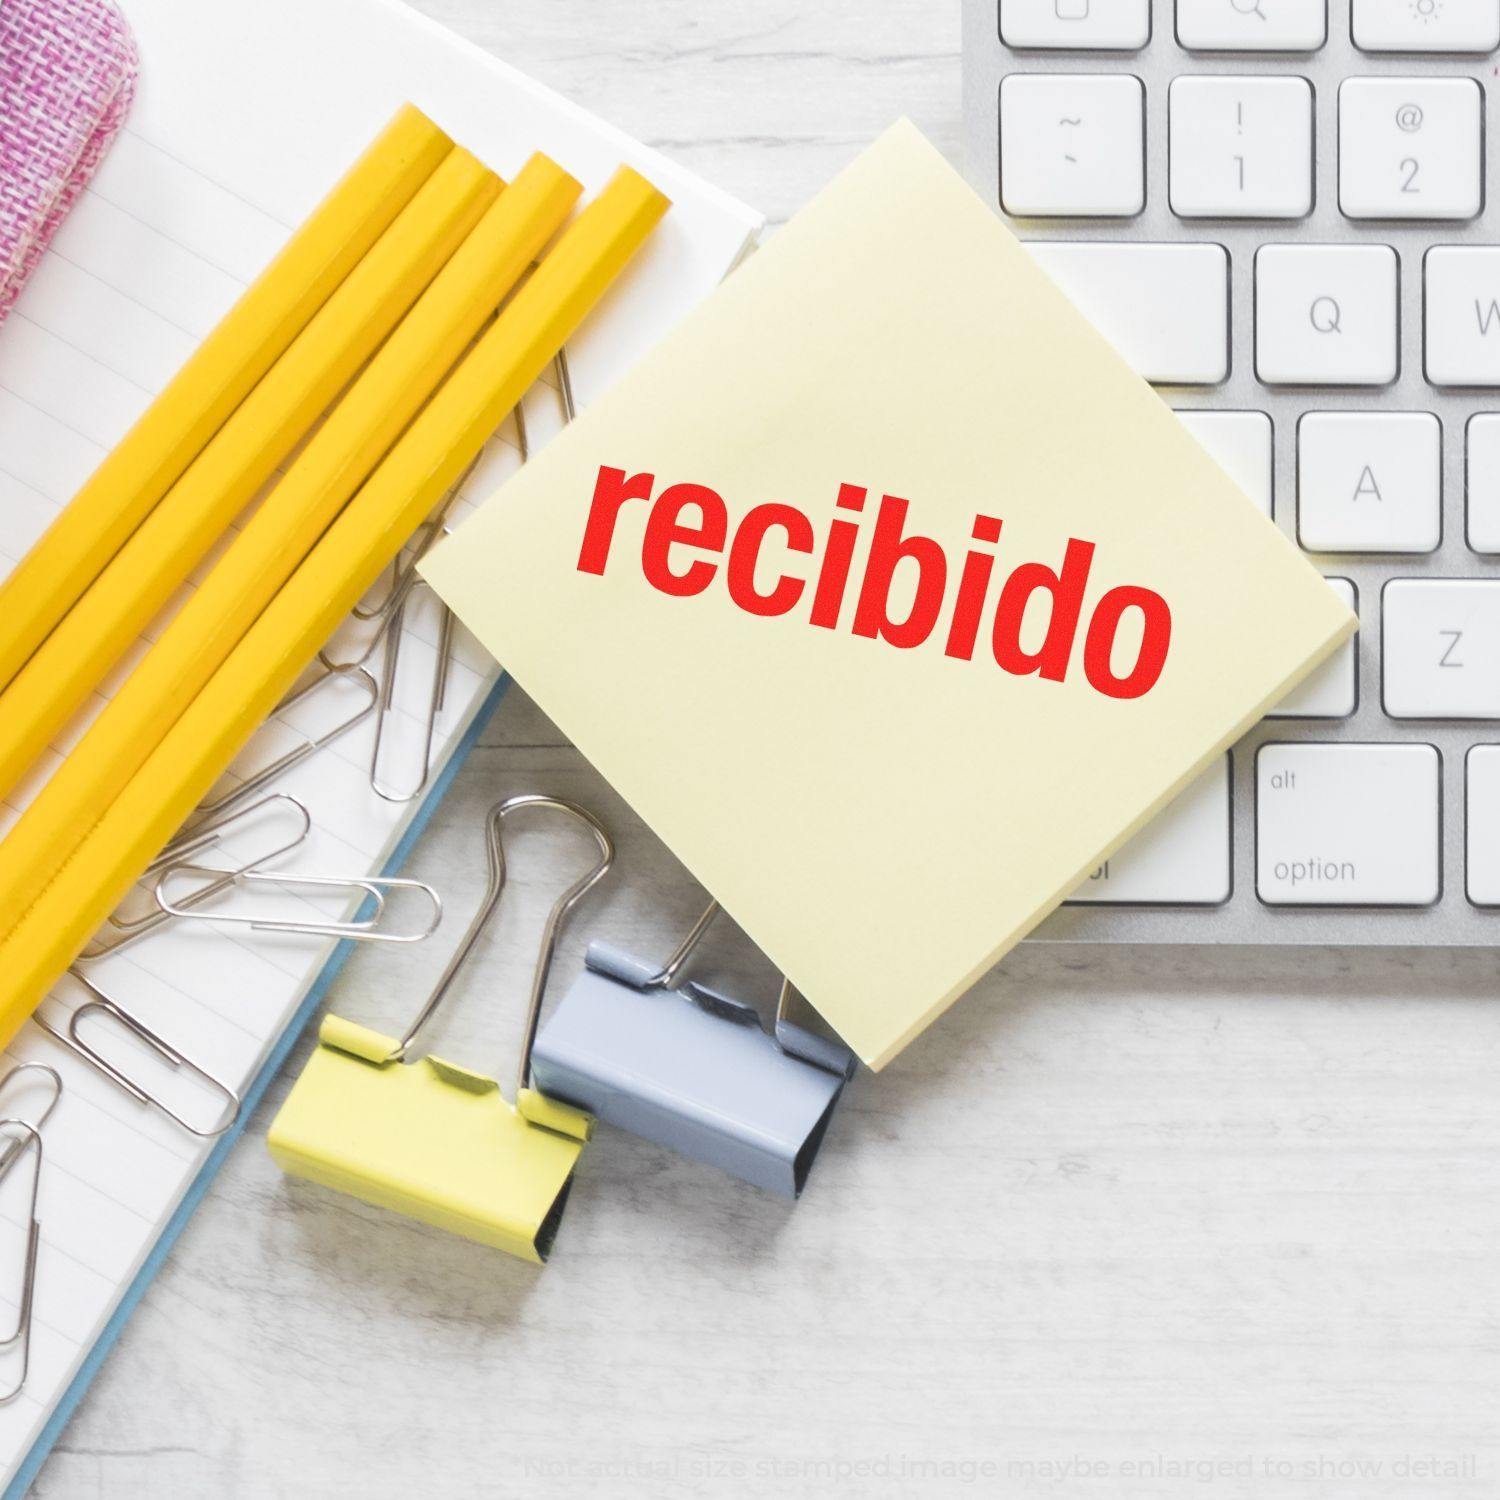 A stock office pre-inked stamp with a stamped image showing how the text "recibido" in bold font is displayed after stamping.